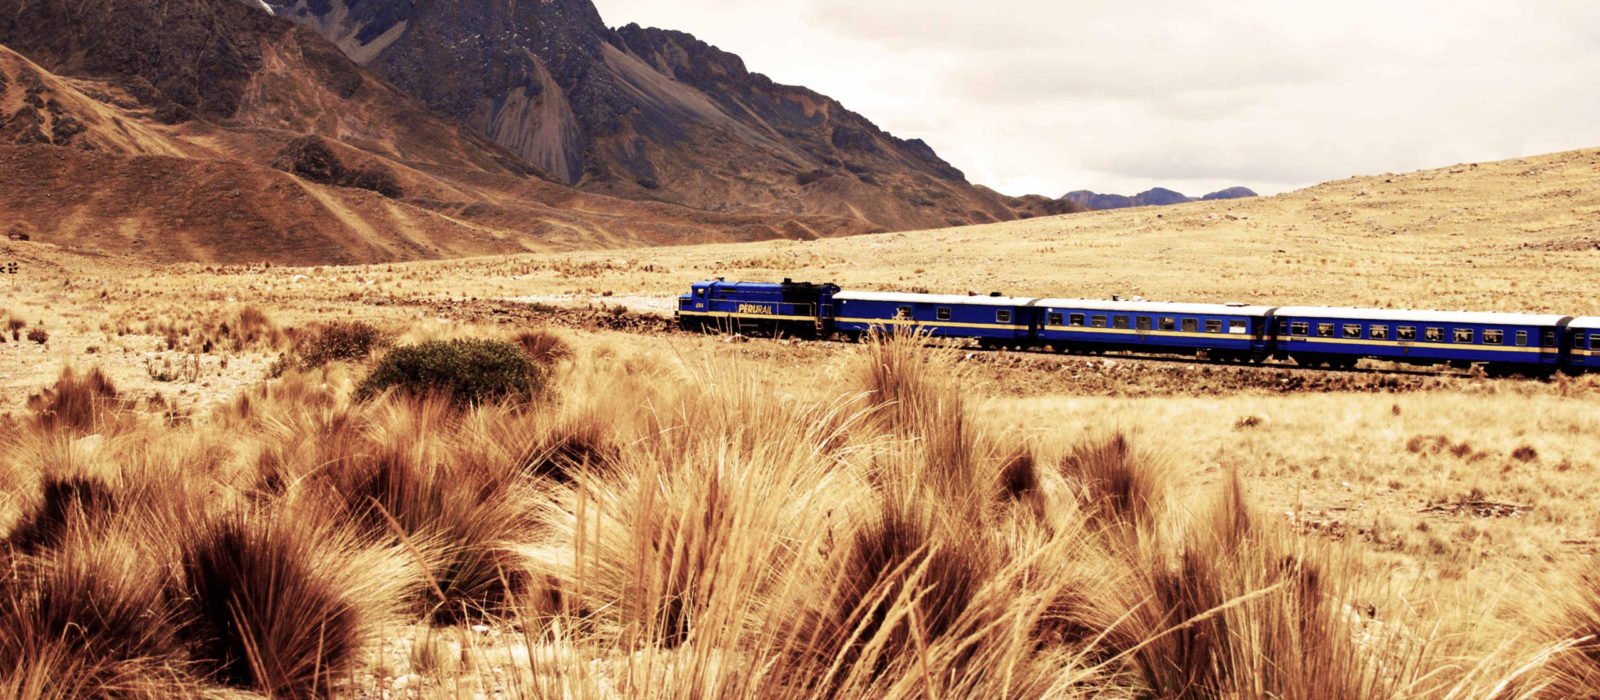 Andean Explorer train passing through the golden landscapes of Peru